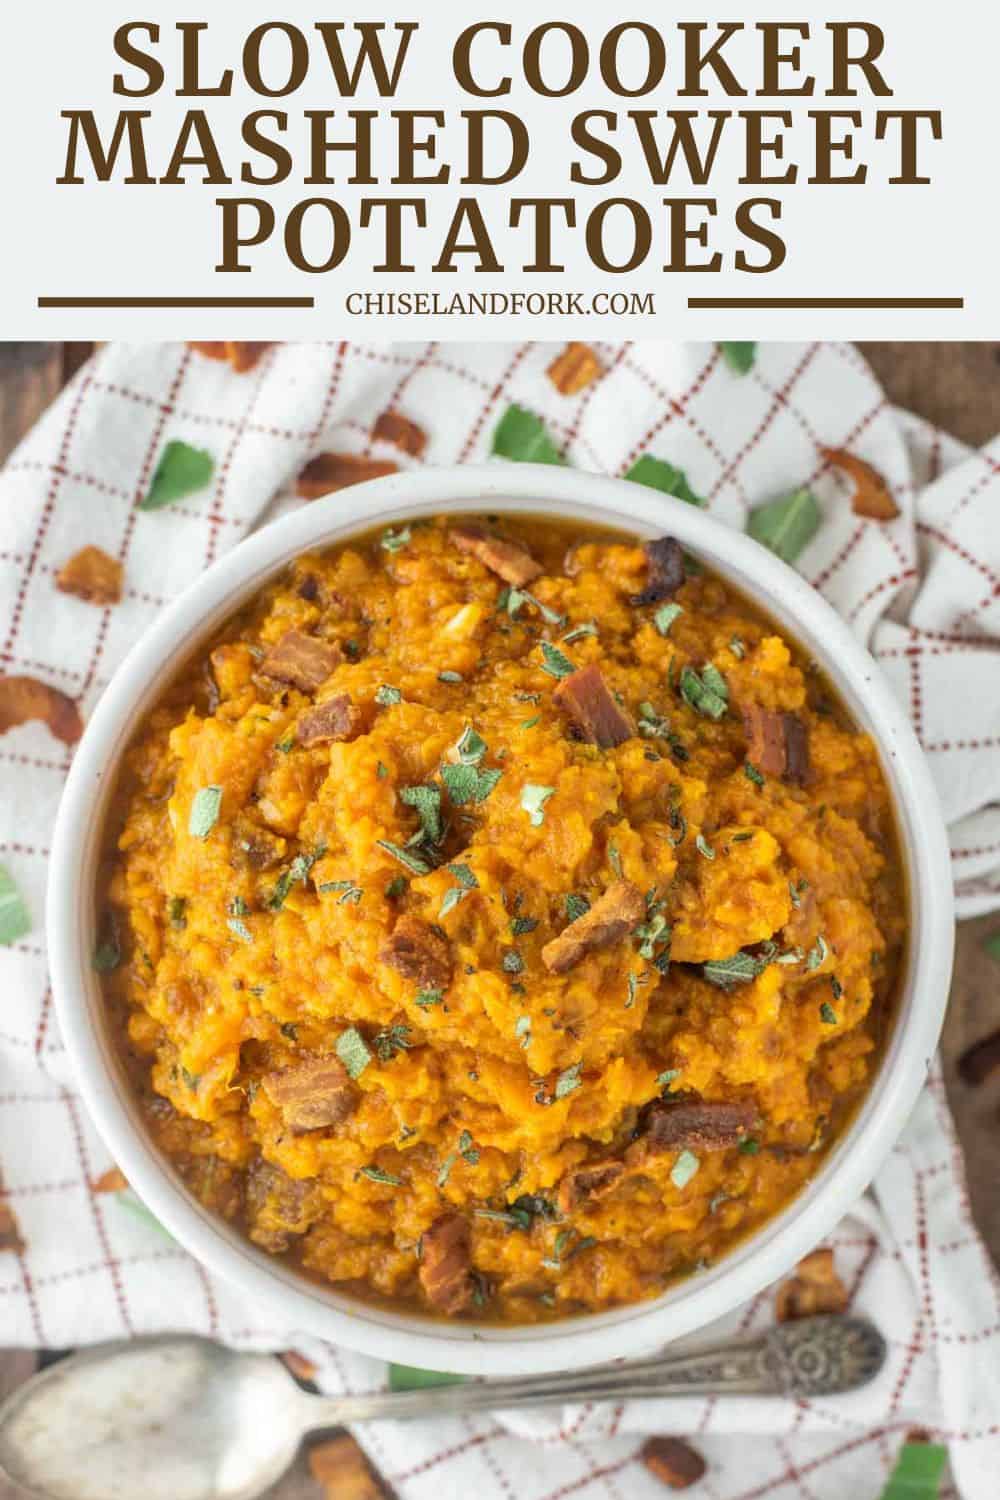 Slow Cooker Mashed Sweet Potatoes Recipe - Chisel & Fork